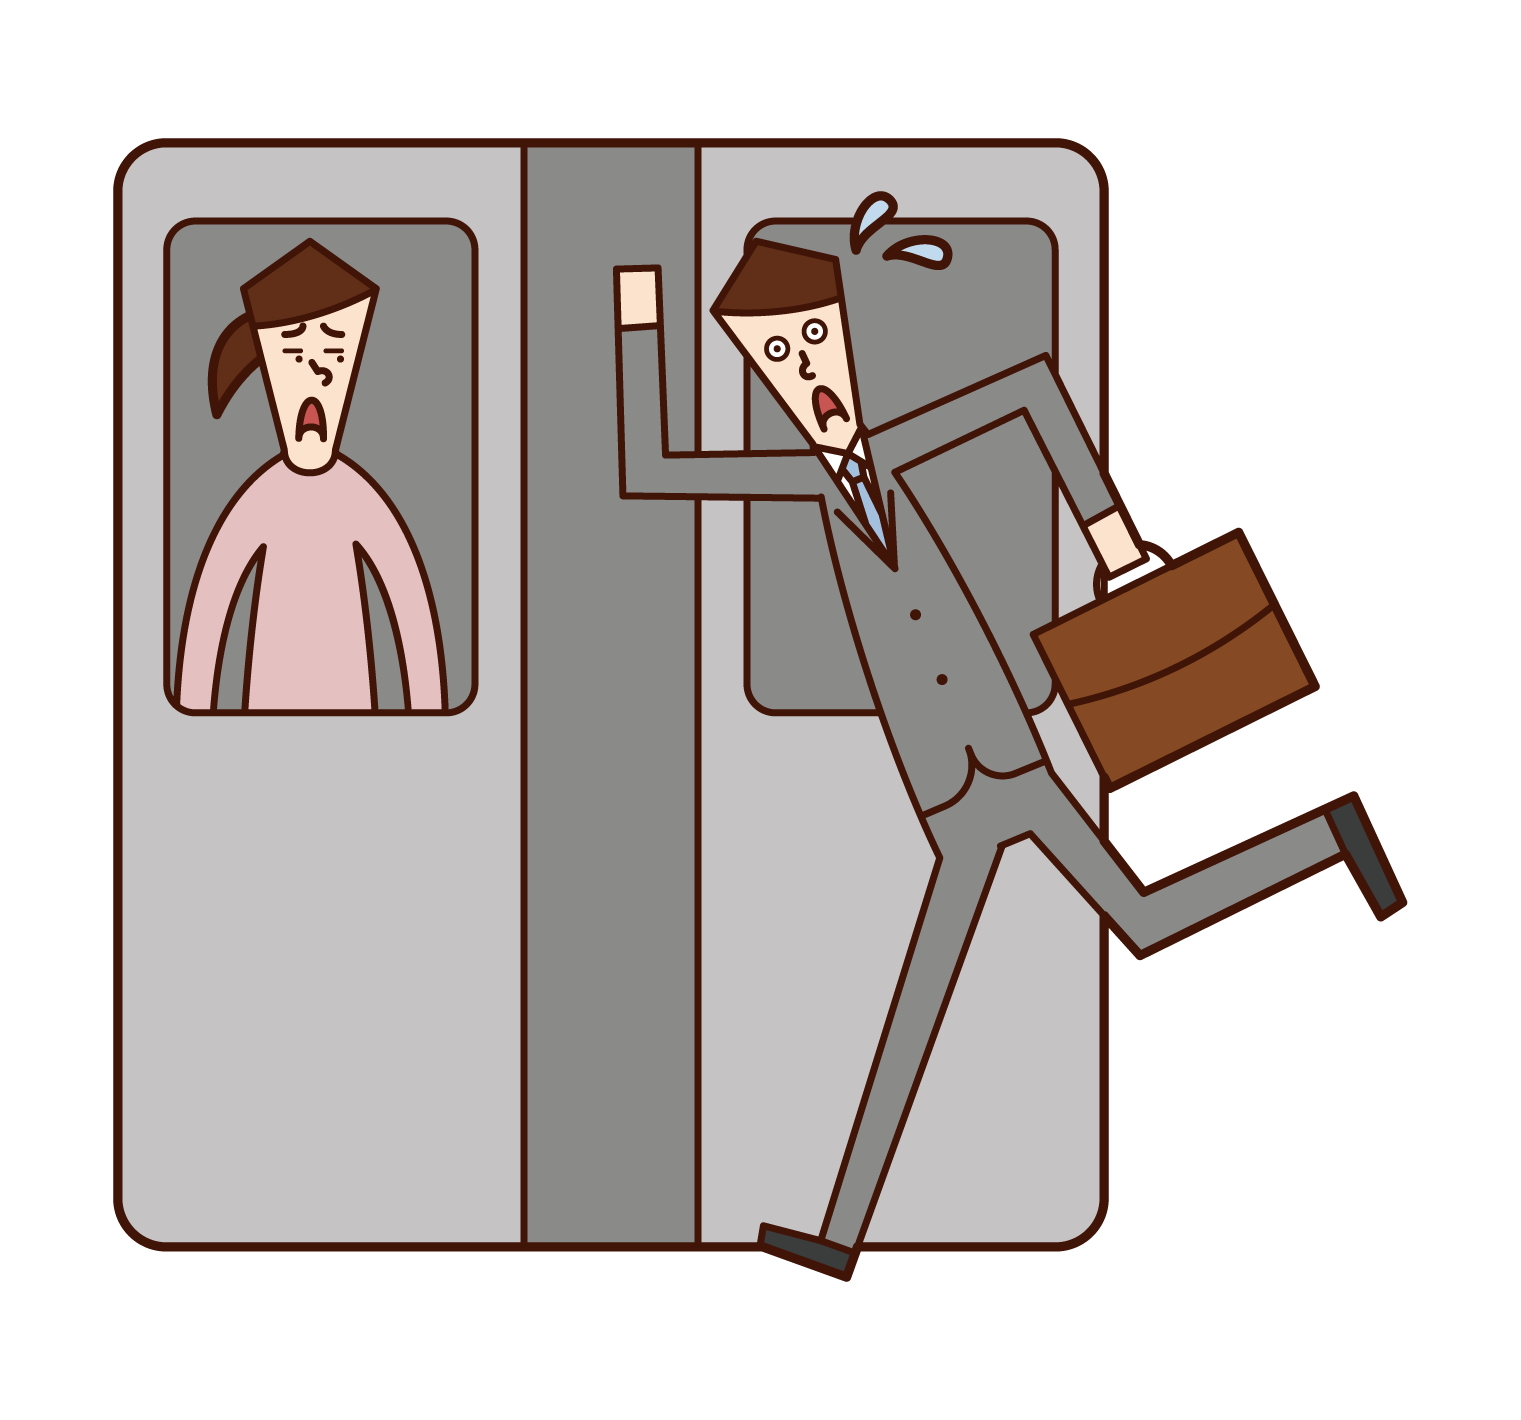 Illustration of a man running into a train